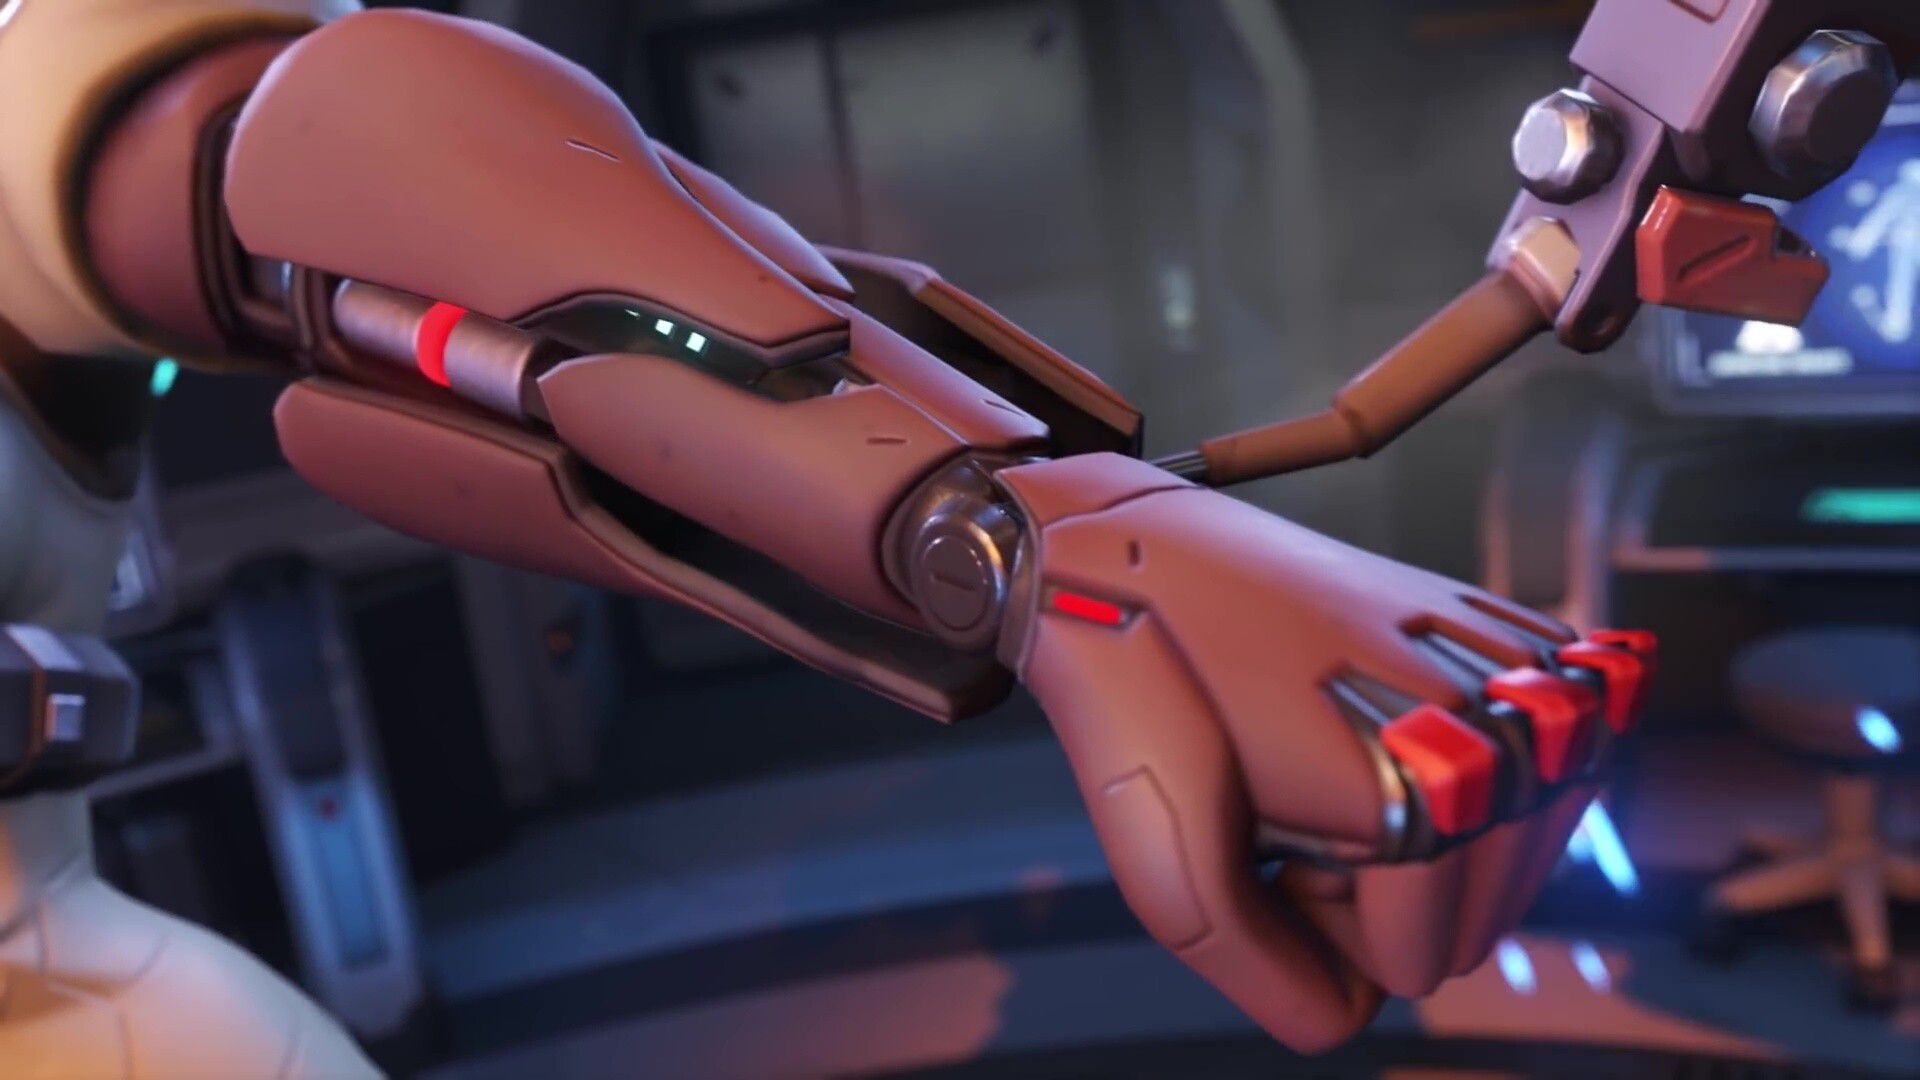 "Sojoan", a new character with a powerful rocket-equipped thigh with a whip whip of the Overwatch 2 machine 7